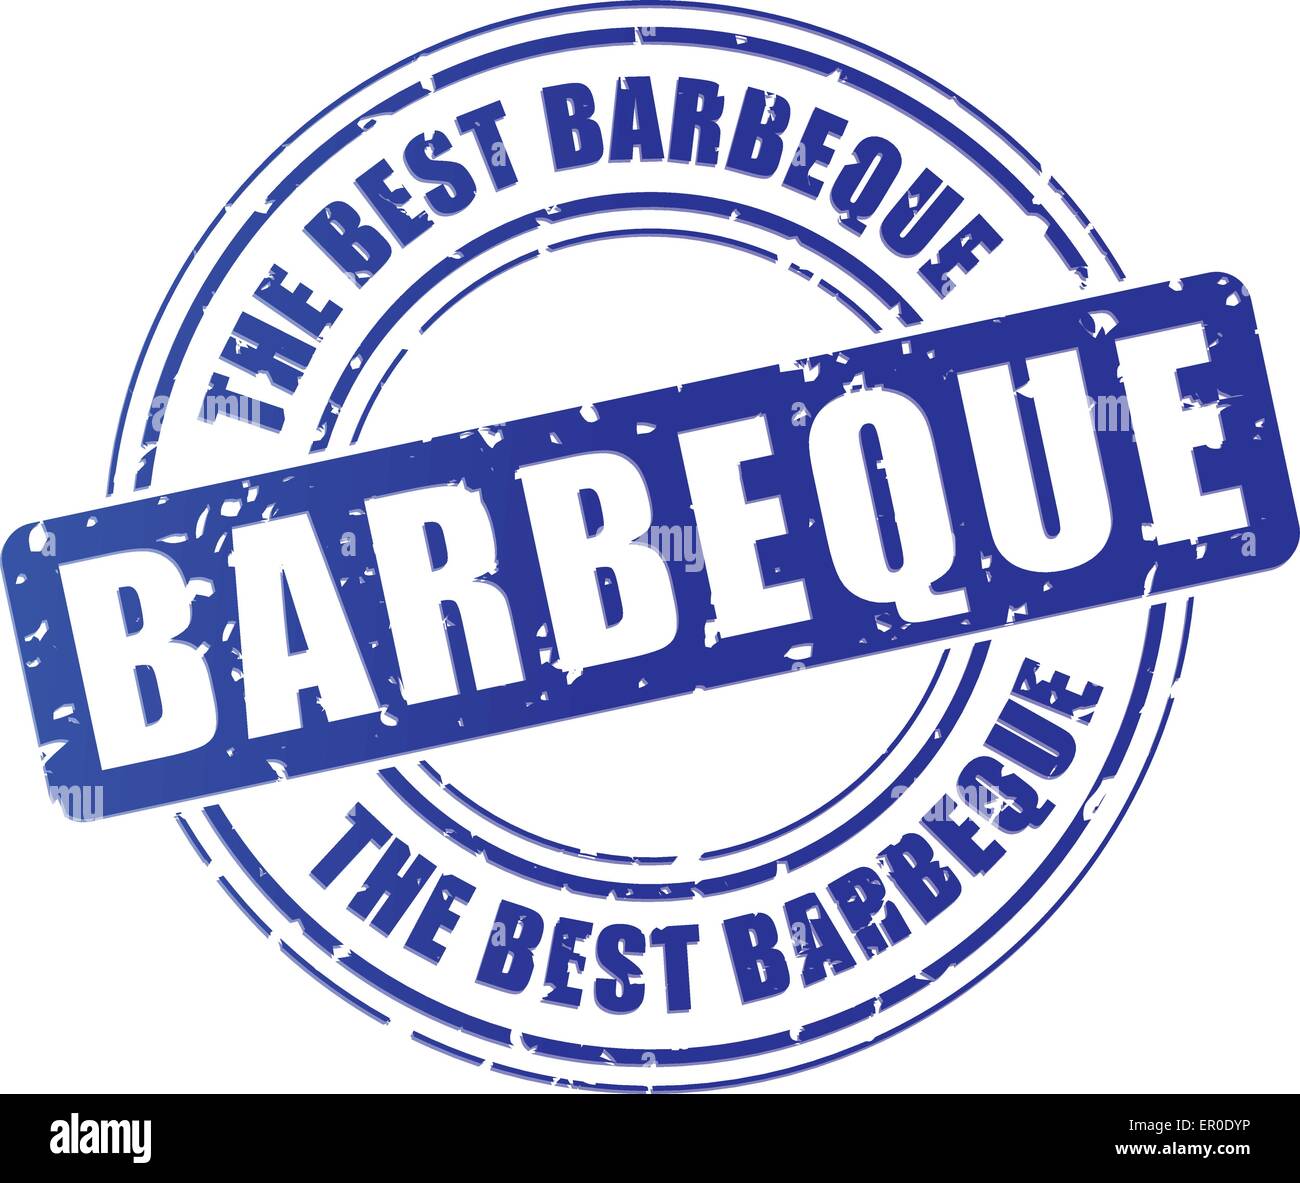 illustration of blue barbeque stamp on white background Stock Vector